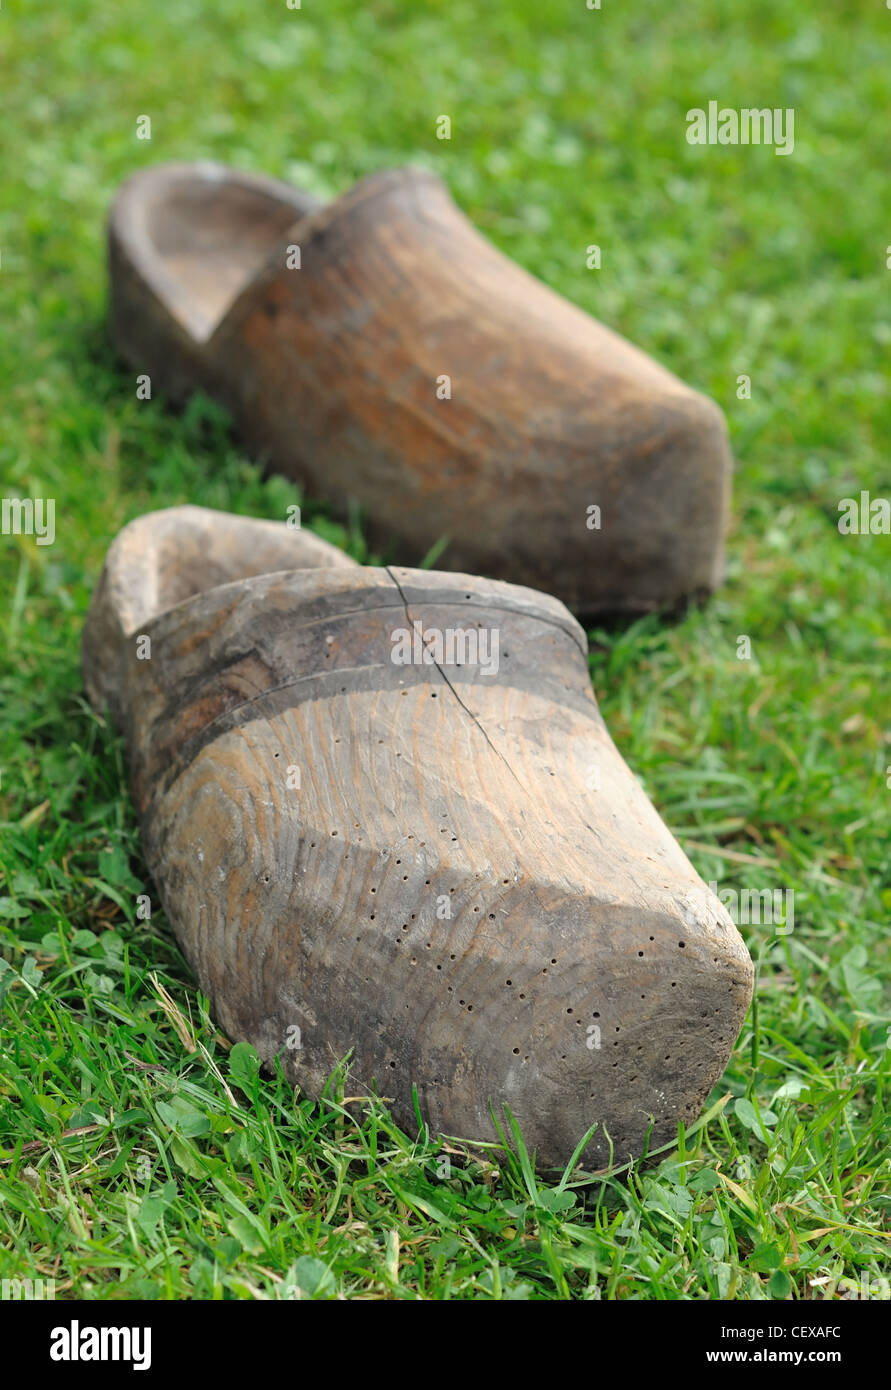 Two old Dutch clogs on the grass. Stock Photo